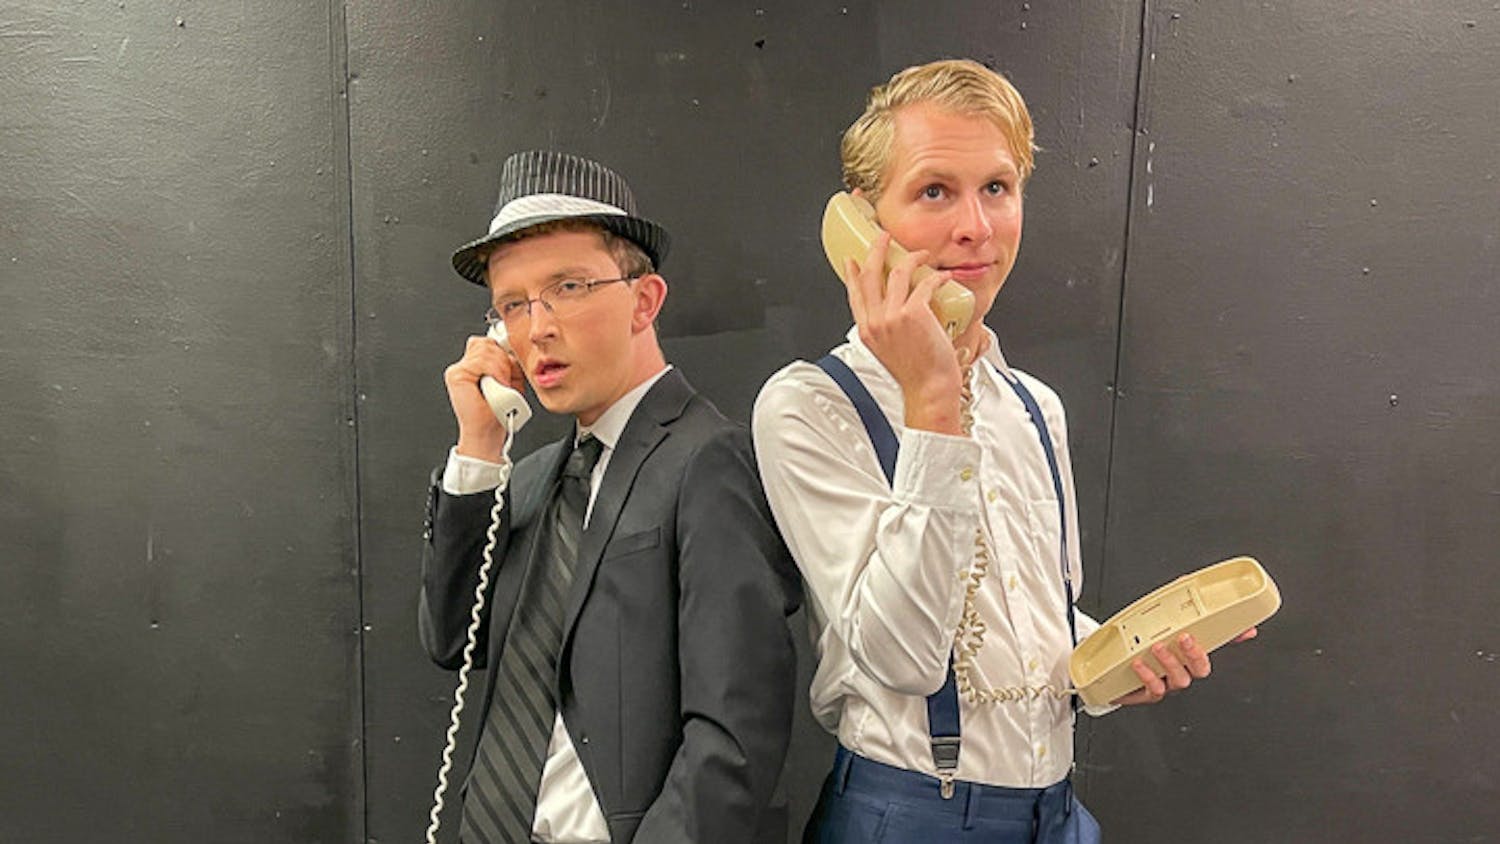 Jack Child (cast as FBI agent Carl Hanratty), on left, and Devyn Porter (cast as Frank Abagnale Jr.), on right, pose for a photograph while holding telephones during the organization’s PR day on Nov. 6, 2022. Off Off Broadway is performing "Catch Me If You Can" at Benson Theatre from Nov. 17-20.&nbsp;